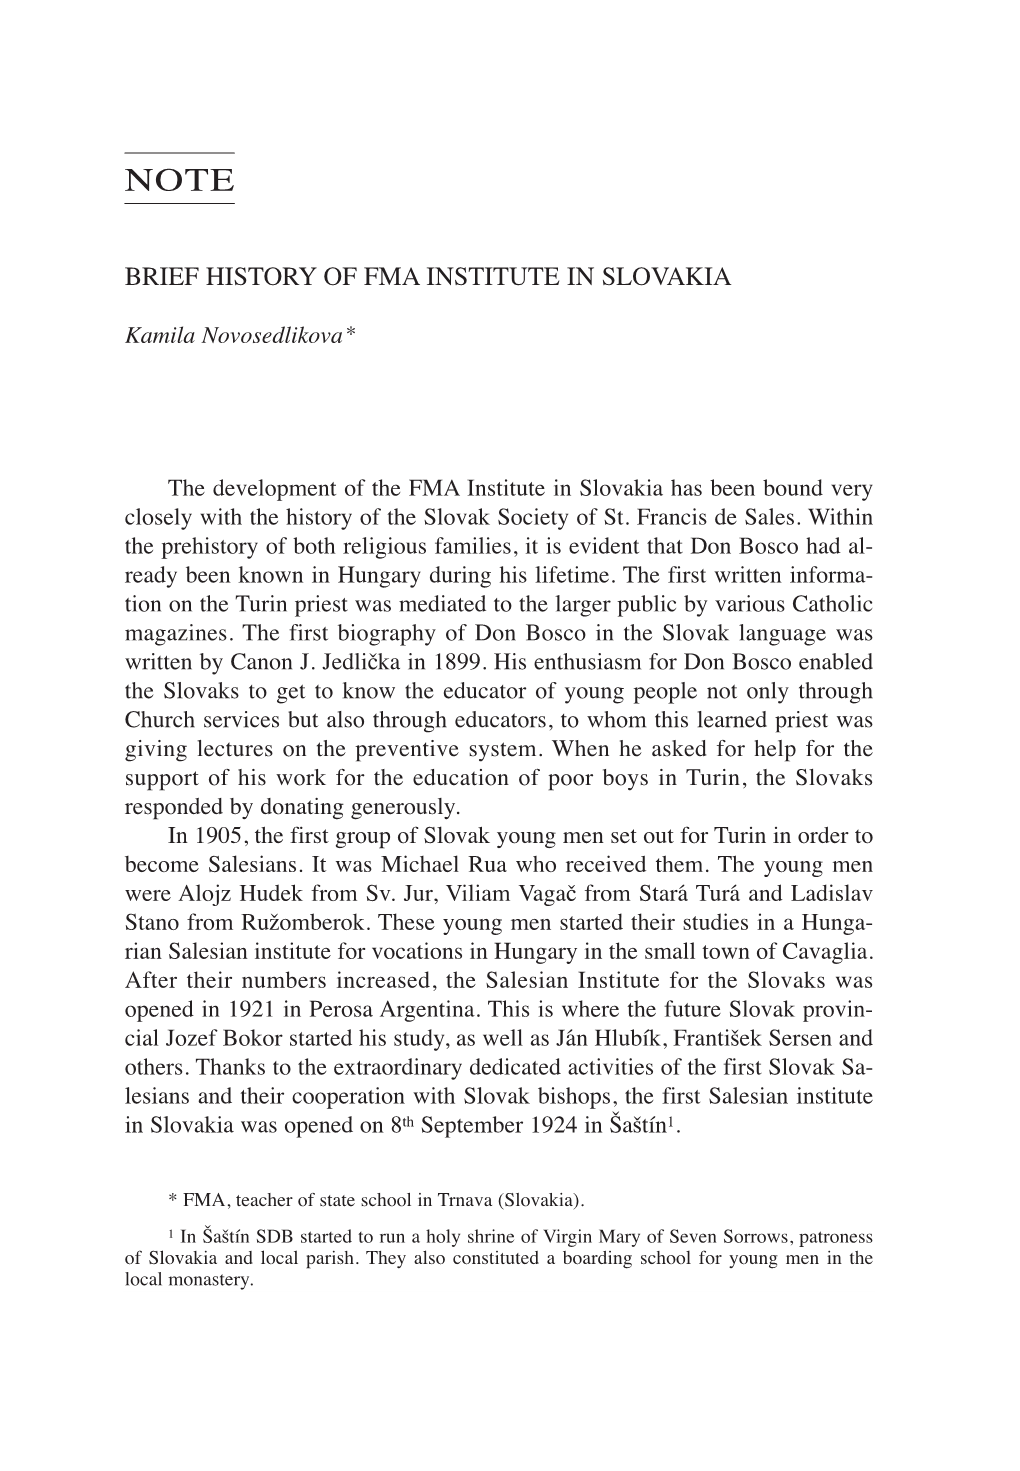 Brief History of Fma Institute in Slovakia